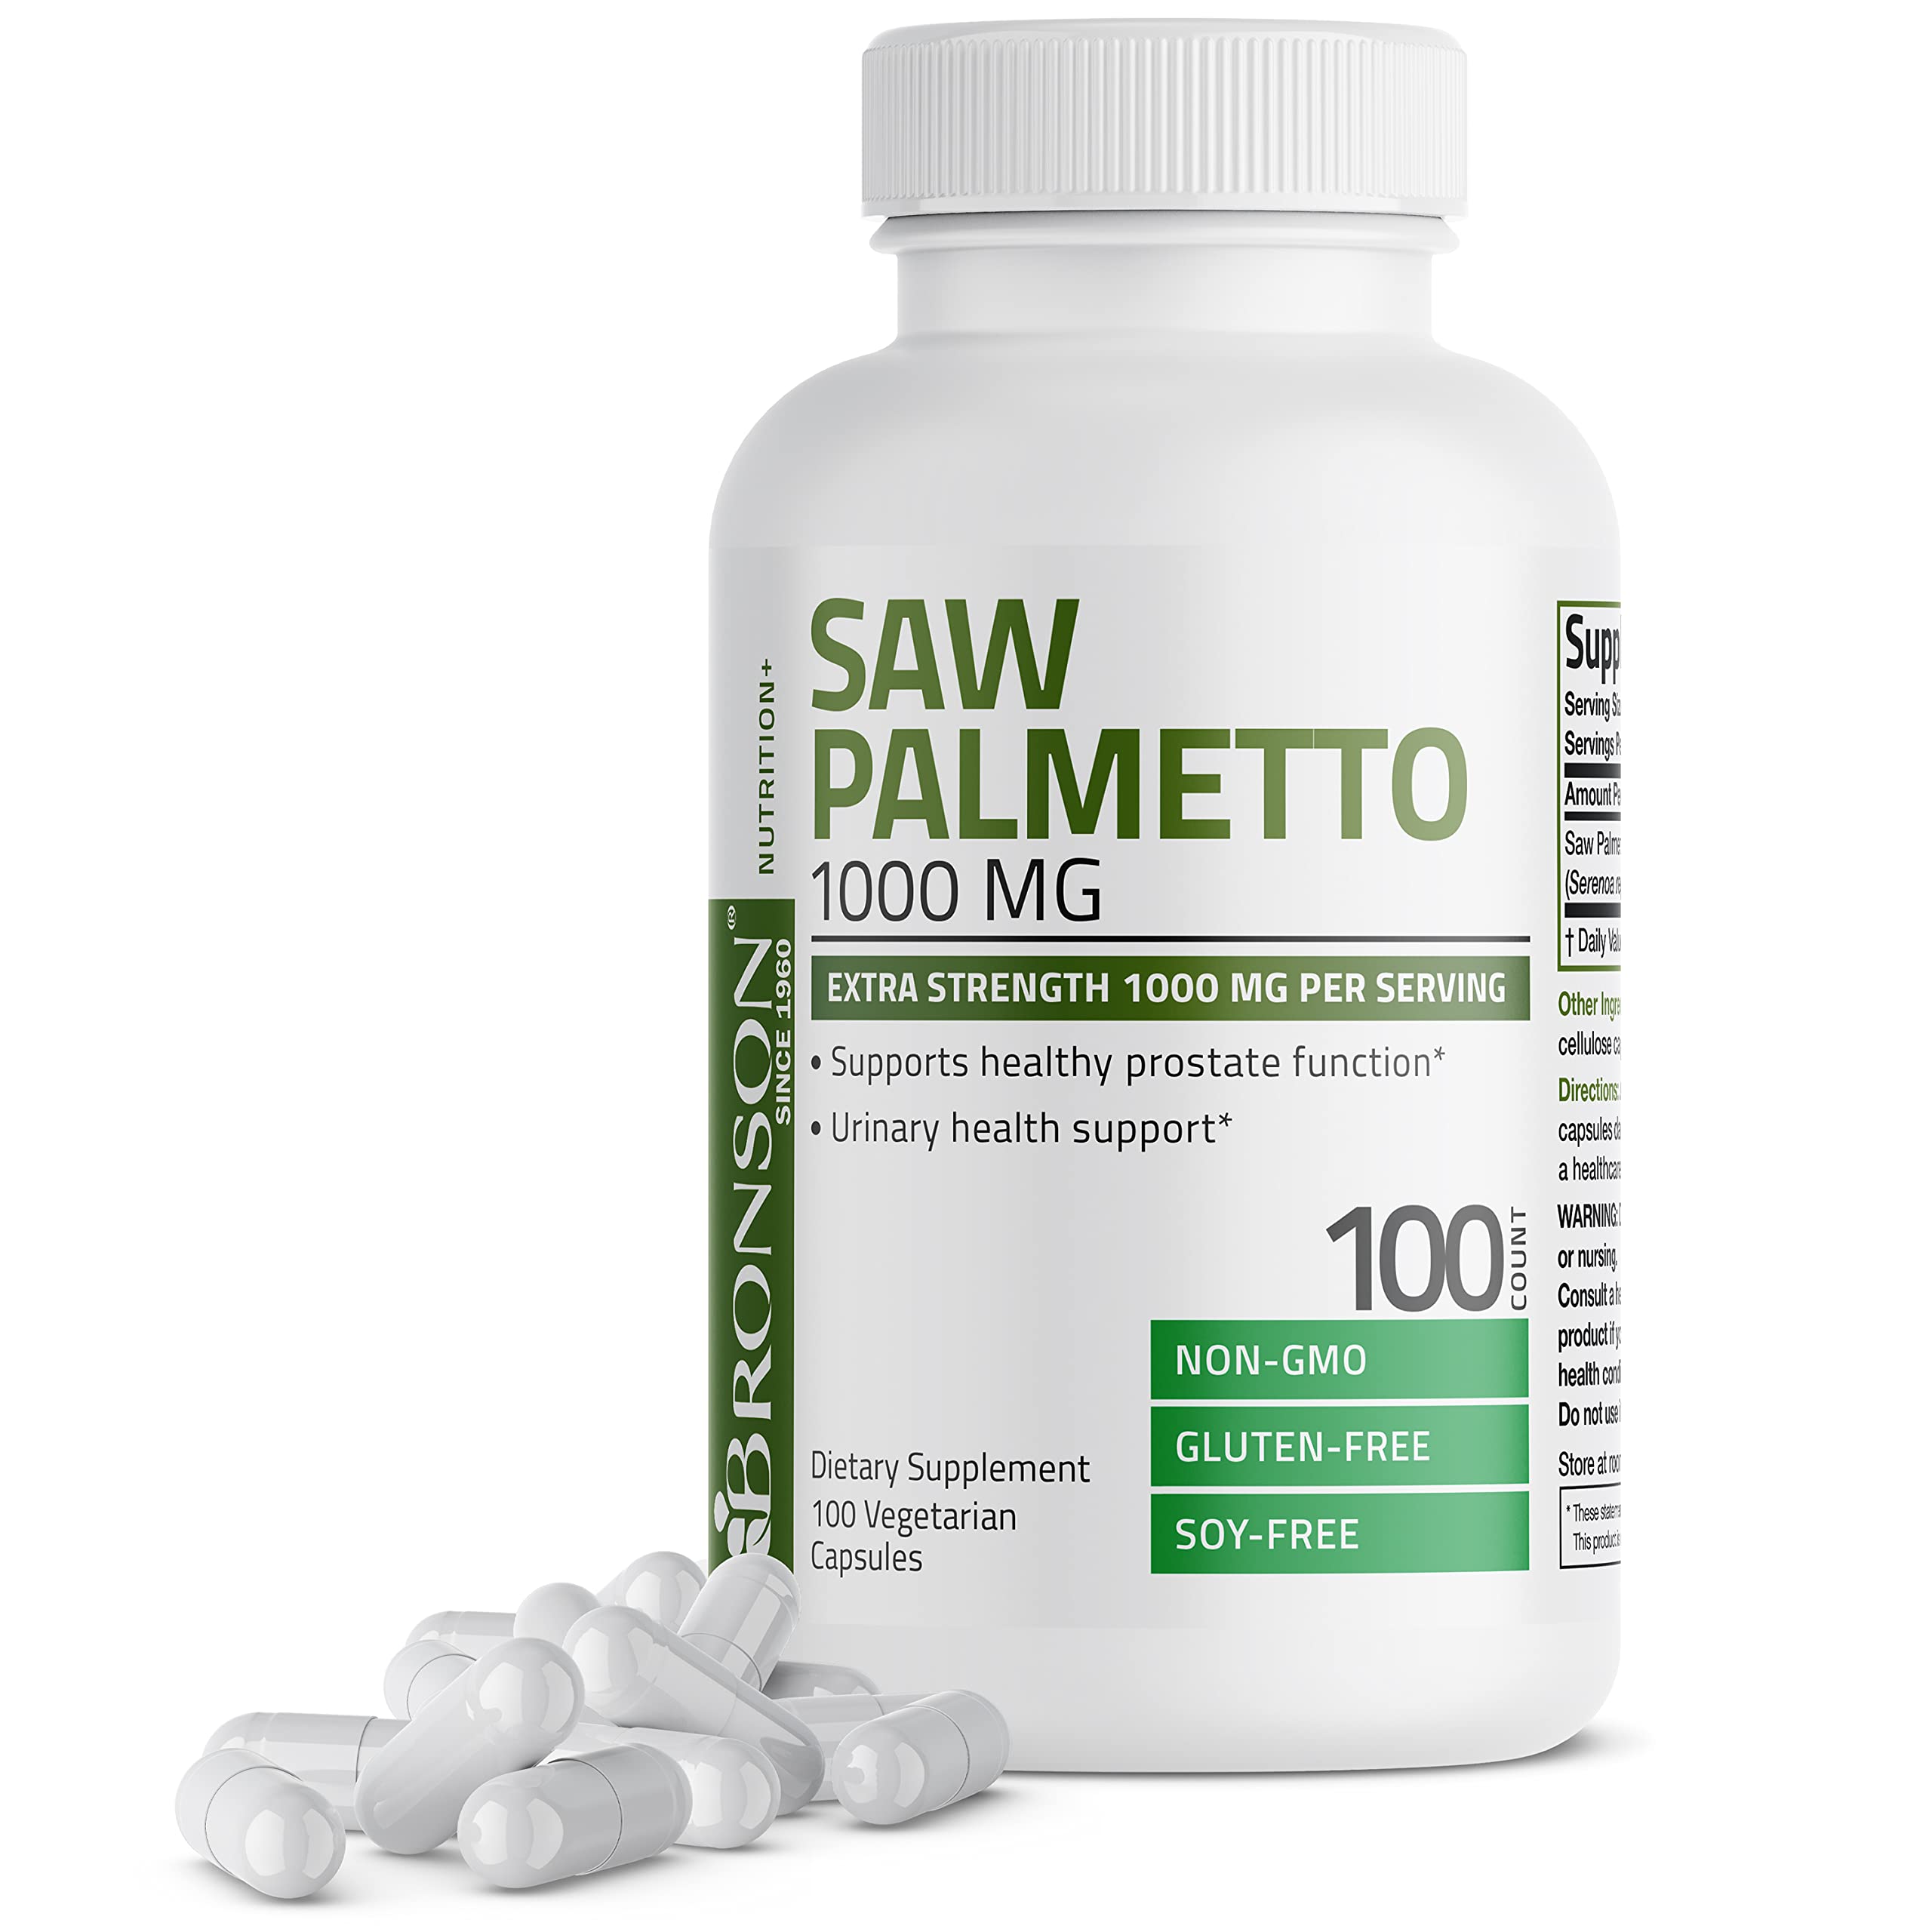 Saw Palmetto Extra Strength - 1,000 mg view 1 of 6